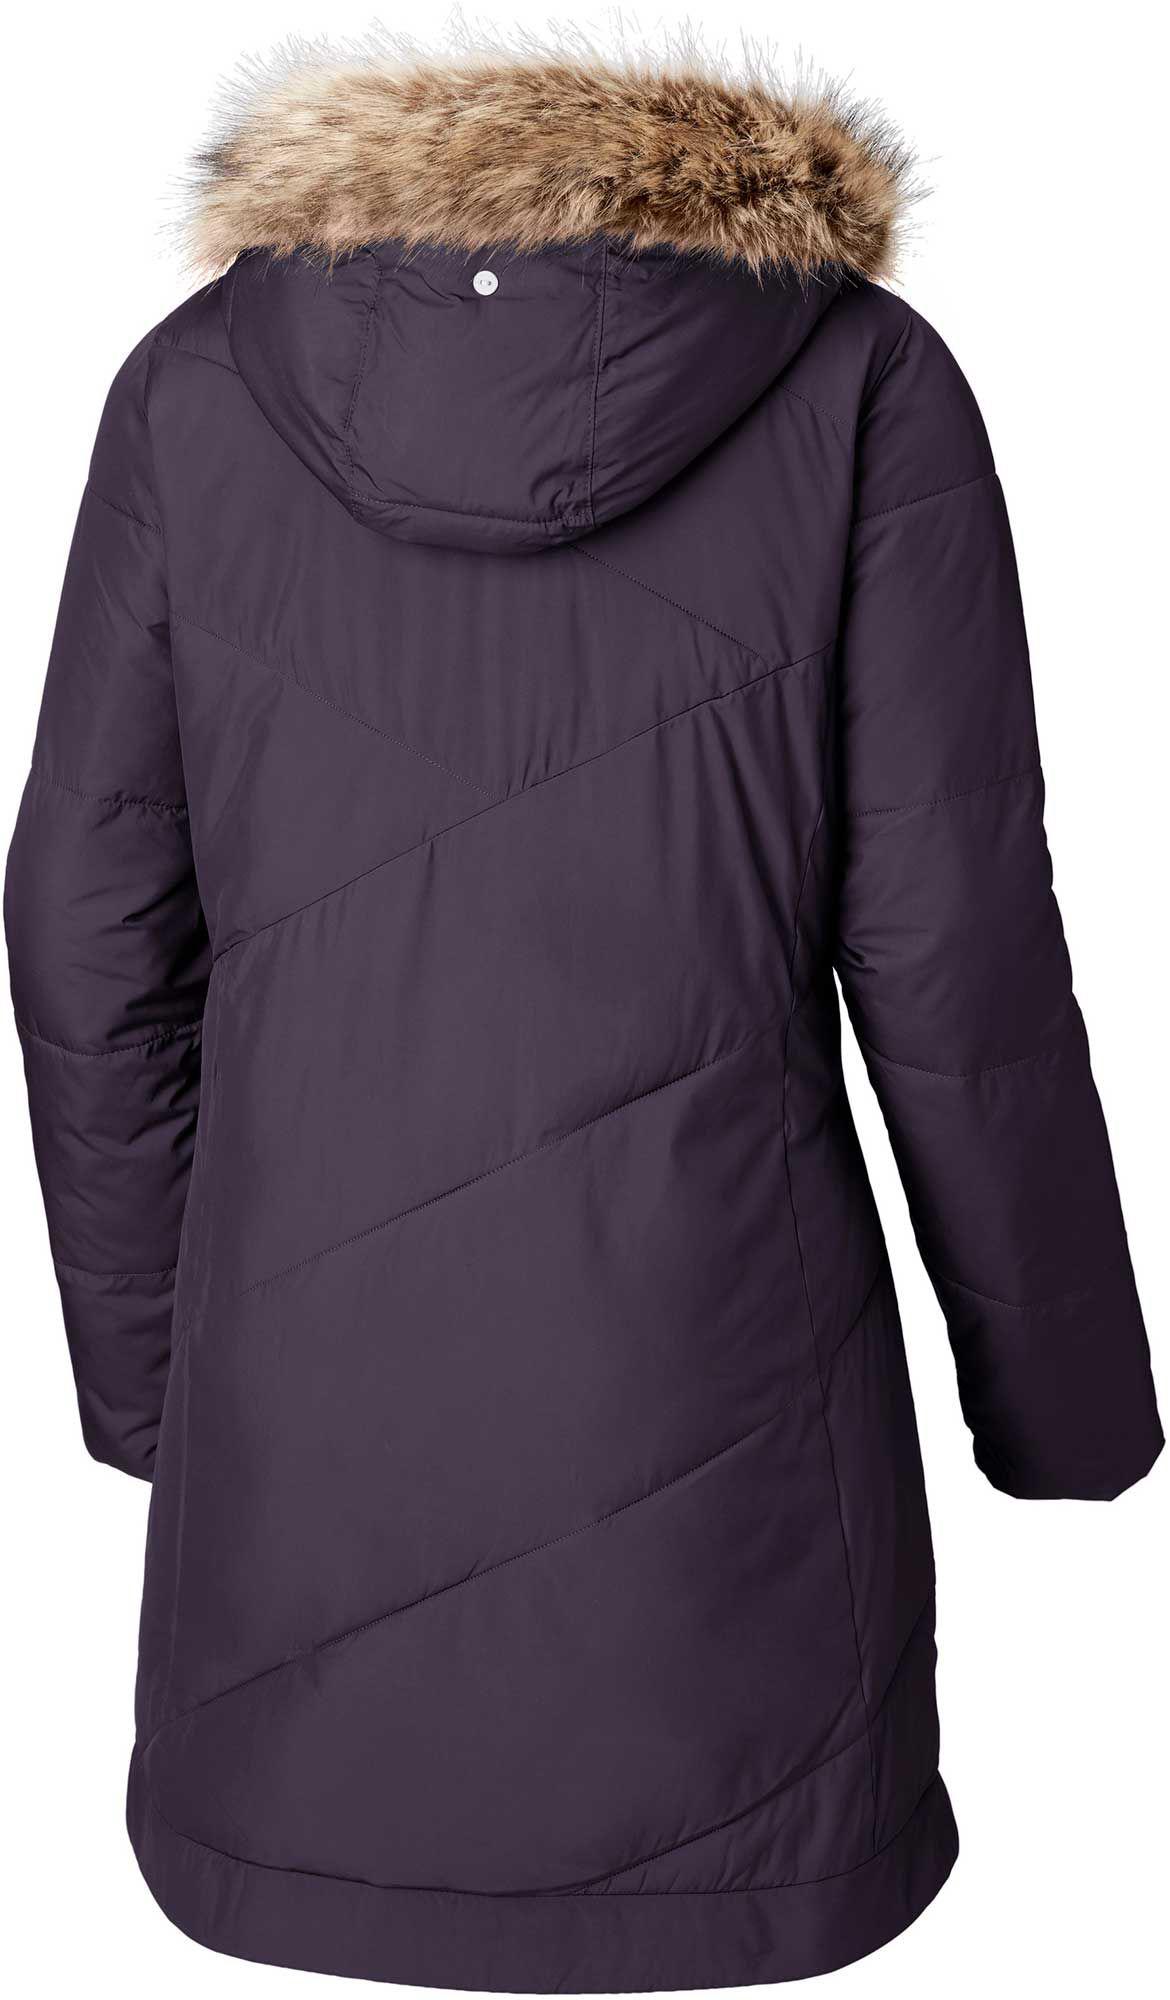 columbia snow eclipse mid insulated jacket